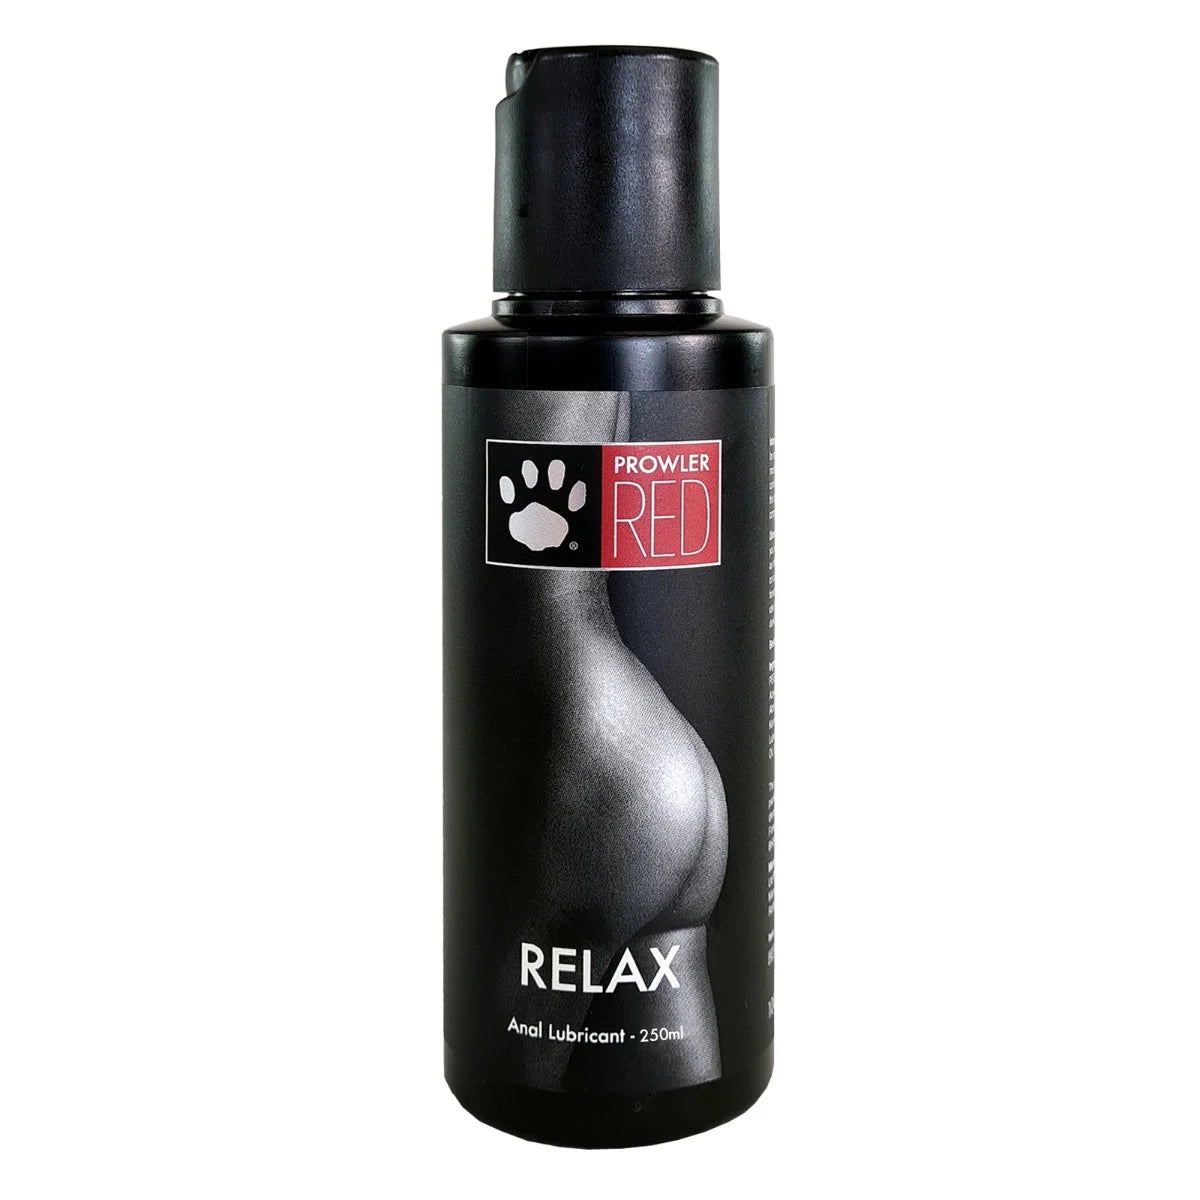 Prowler RED Relax Anal Lube (7021158301860)